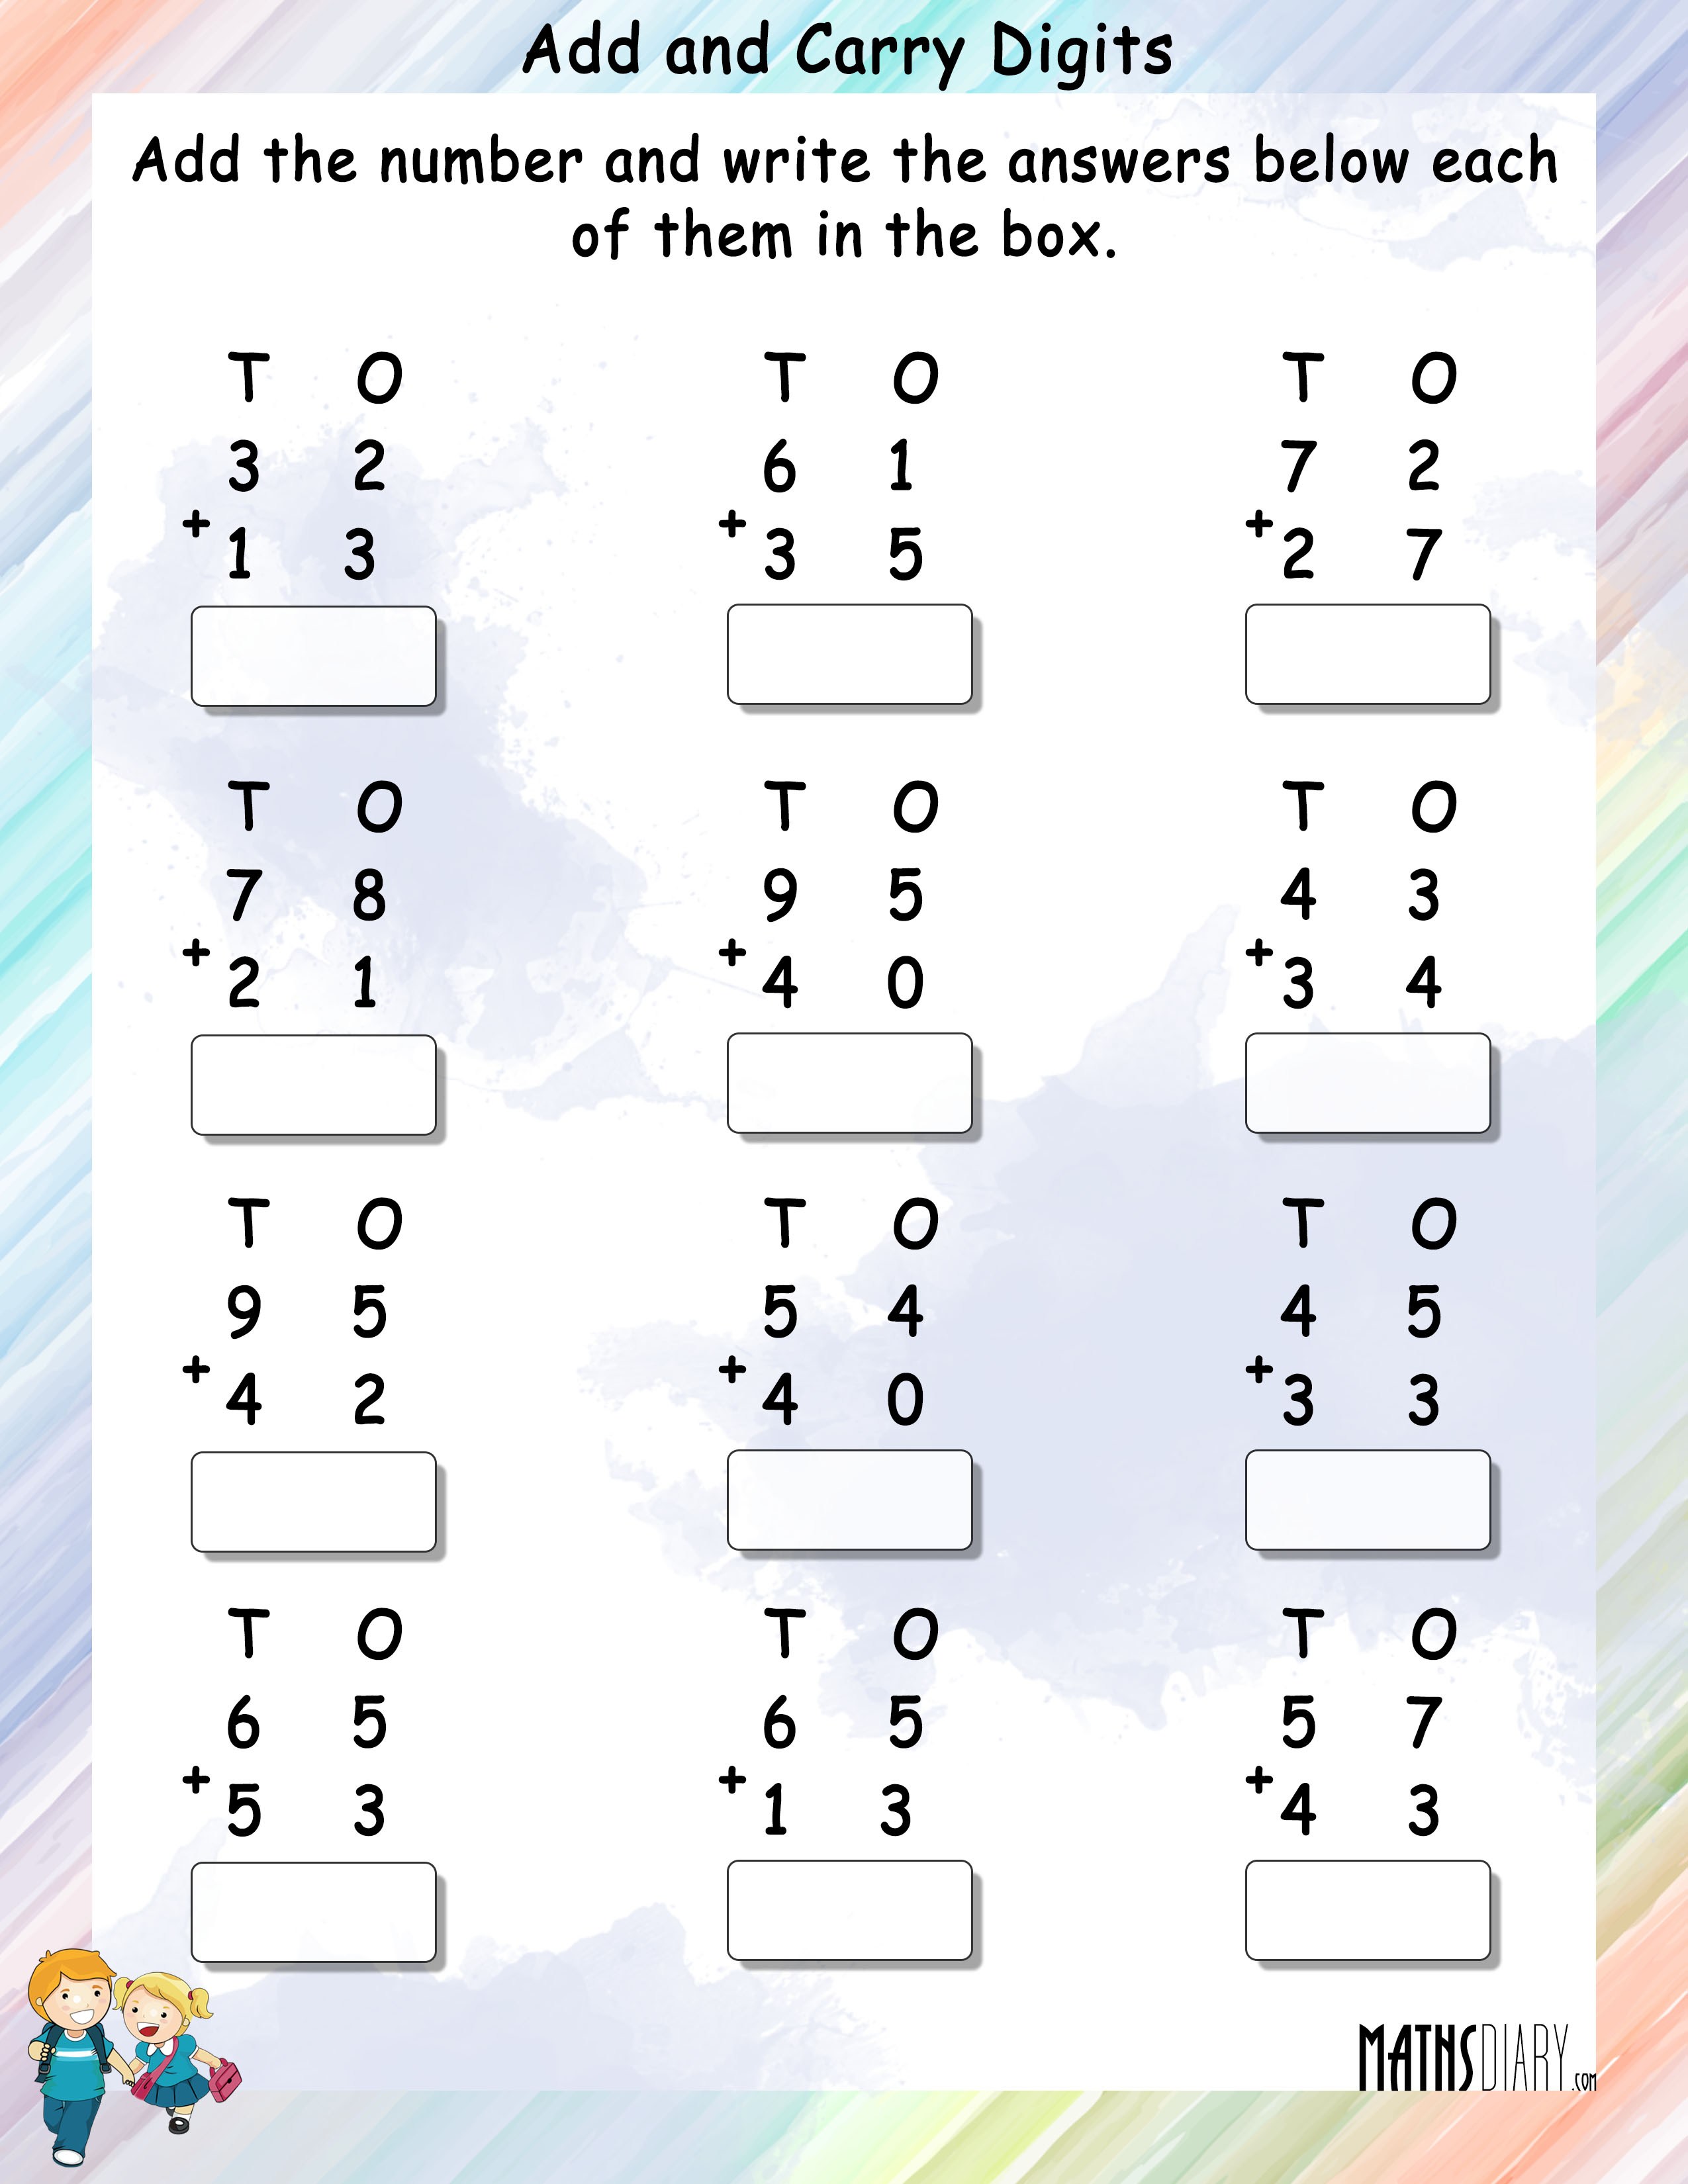 Add And Carry Digits Worksheet 1 